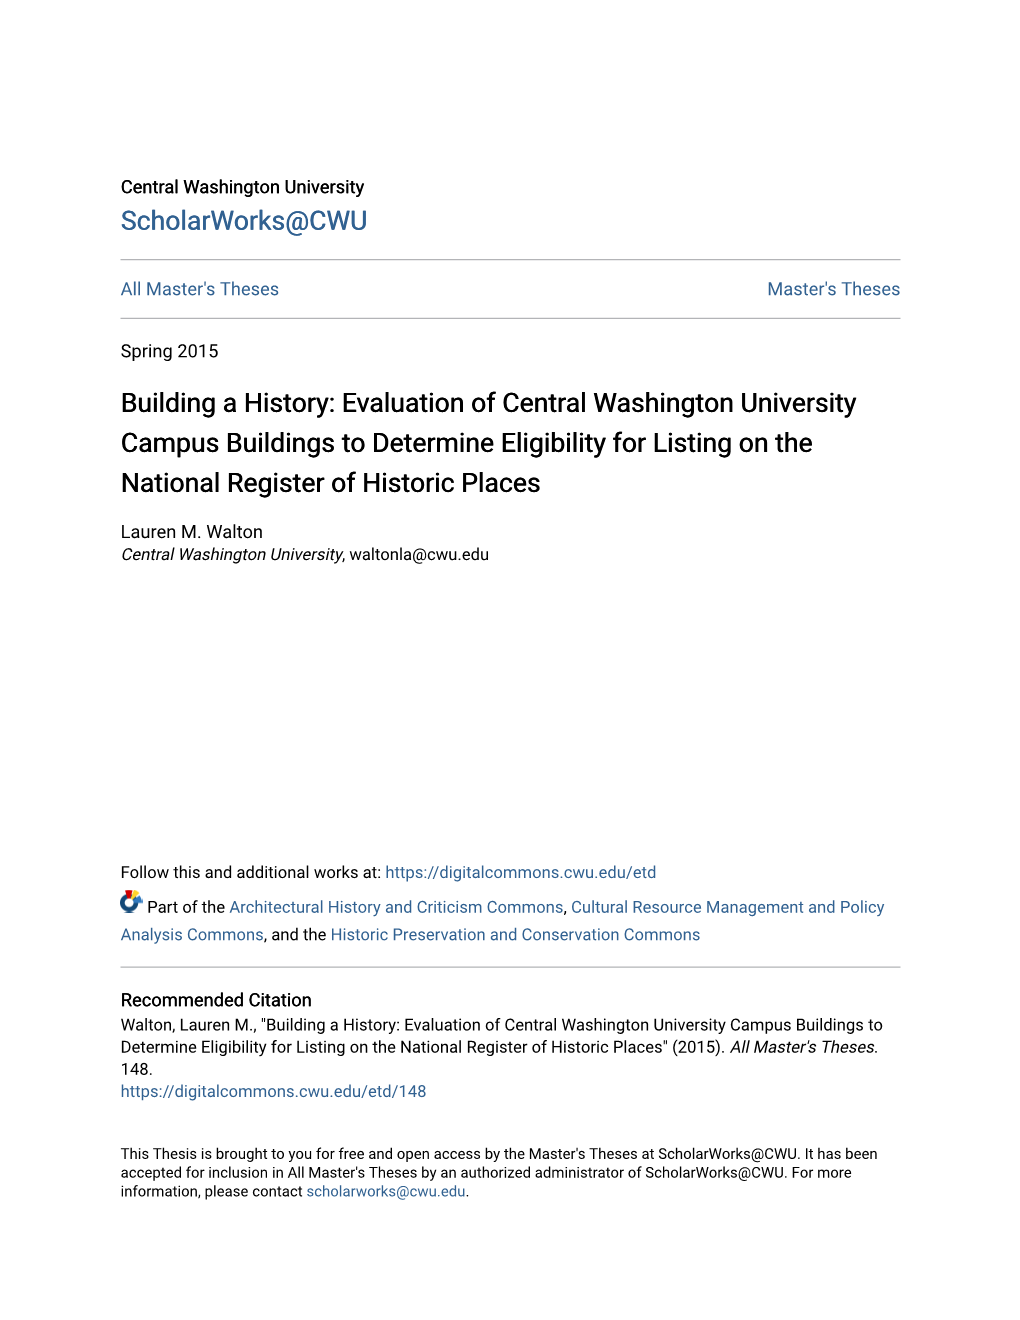 Building a History: Evaluation of Central Washington University Campus Buildings to Determine Eligibility for Listing on the National Register of Historic Places